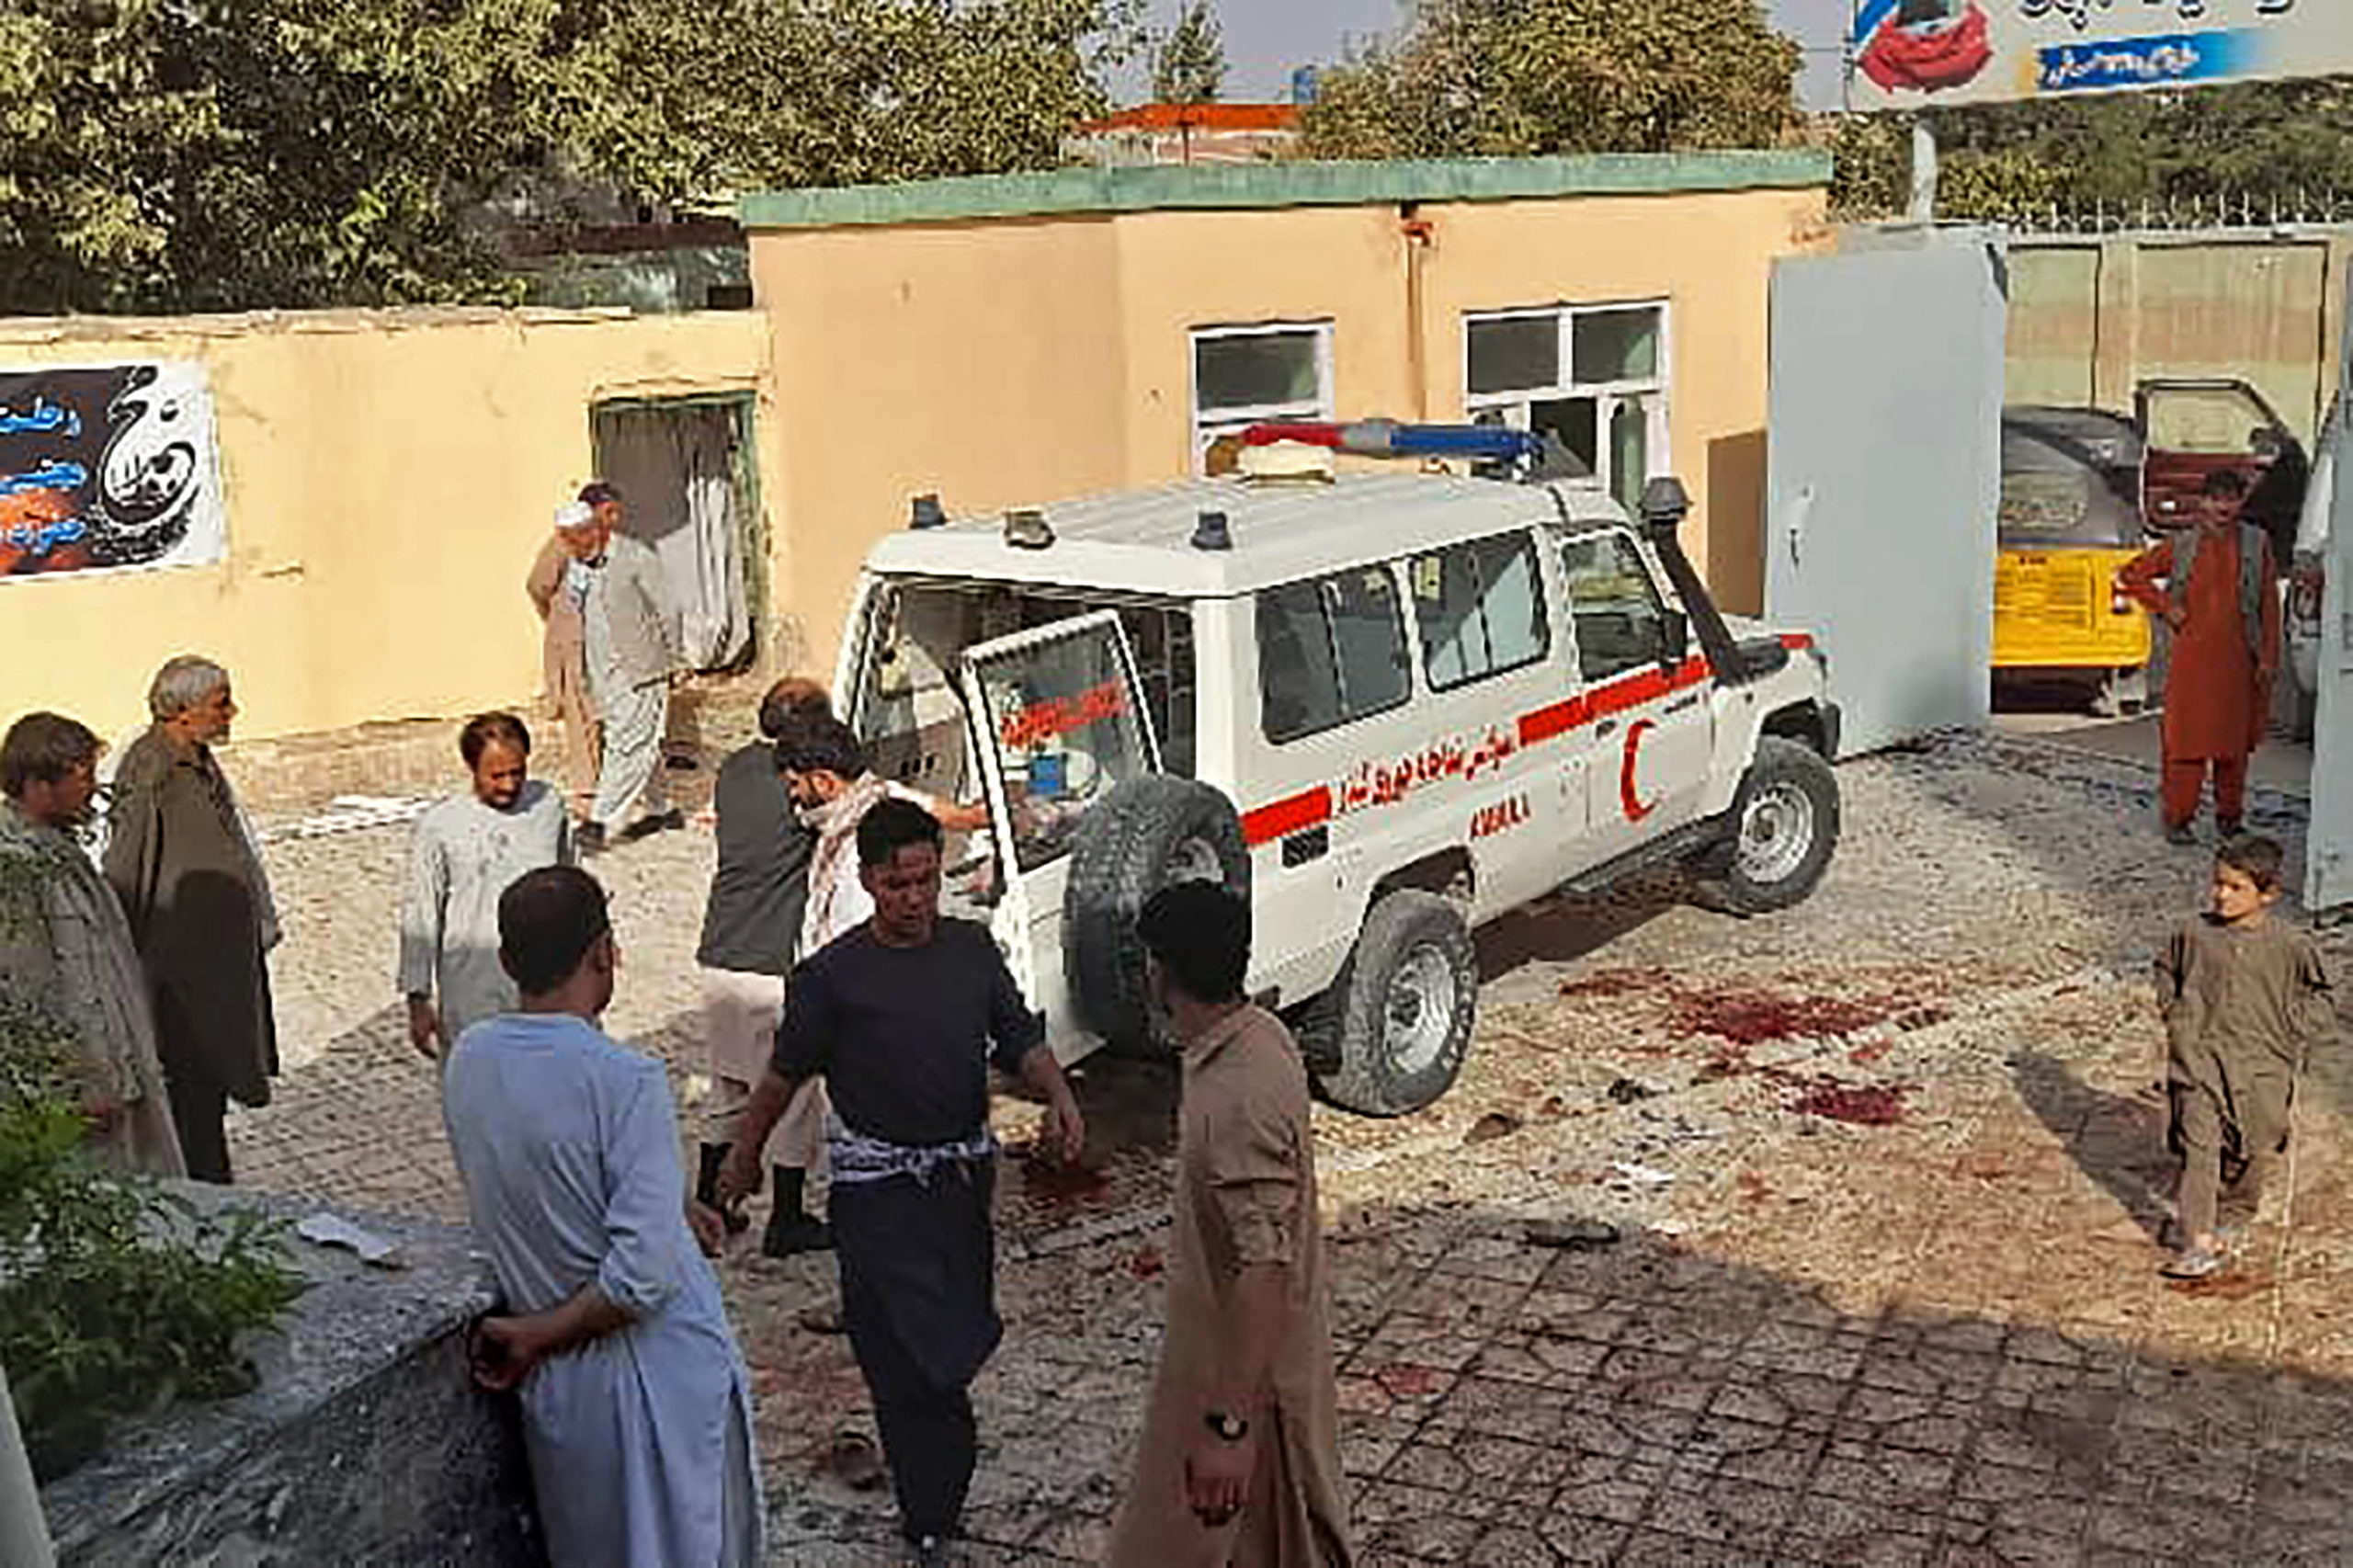 Afghan men stand next to an ambulance after a bomb attack at a mosque in Kunduz on October 8, 2021. (Photo by - / AFP) (Photo by -/AFP via Getty Images)